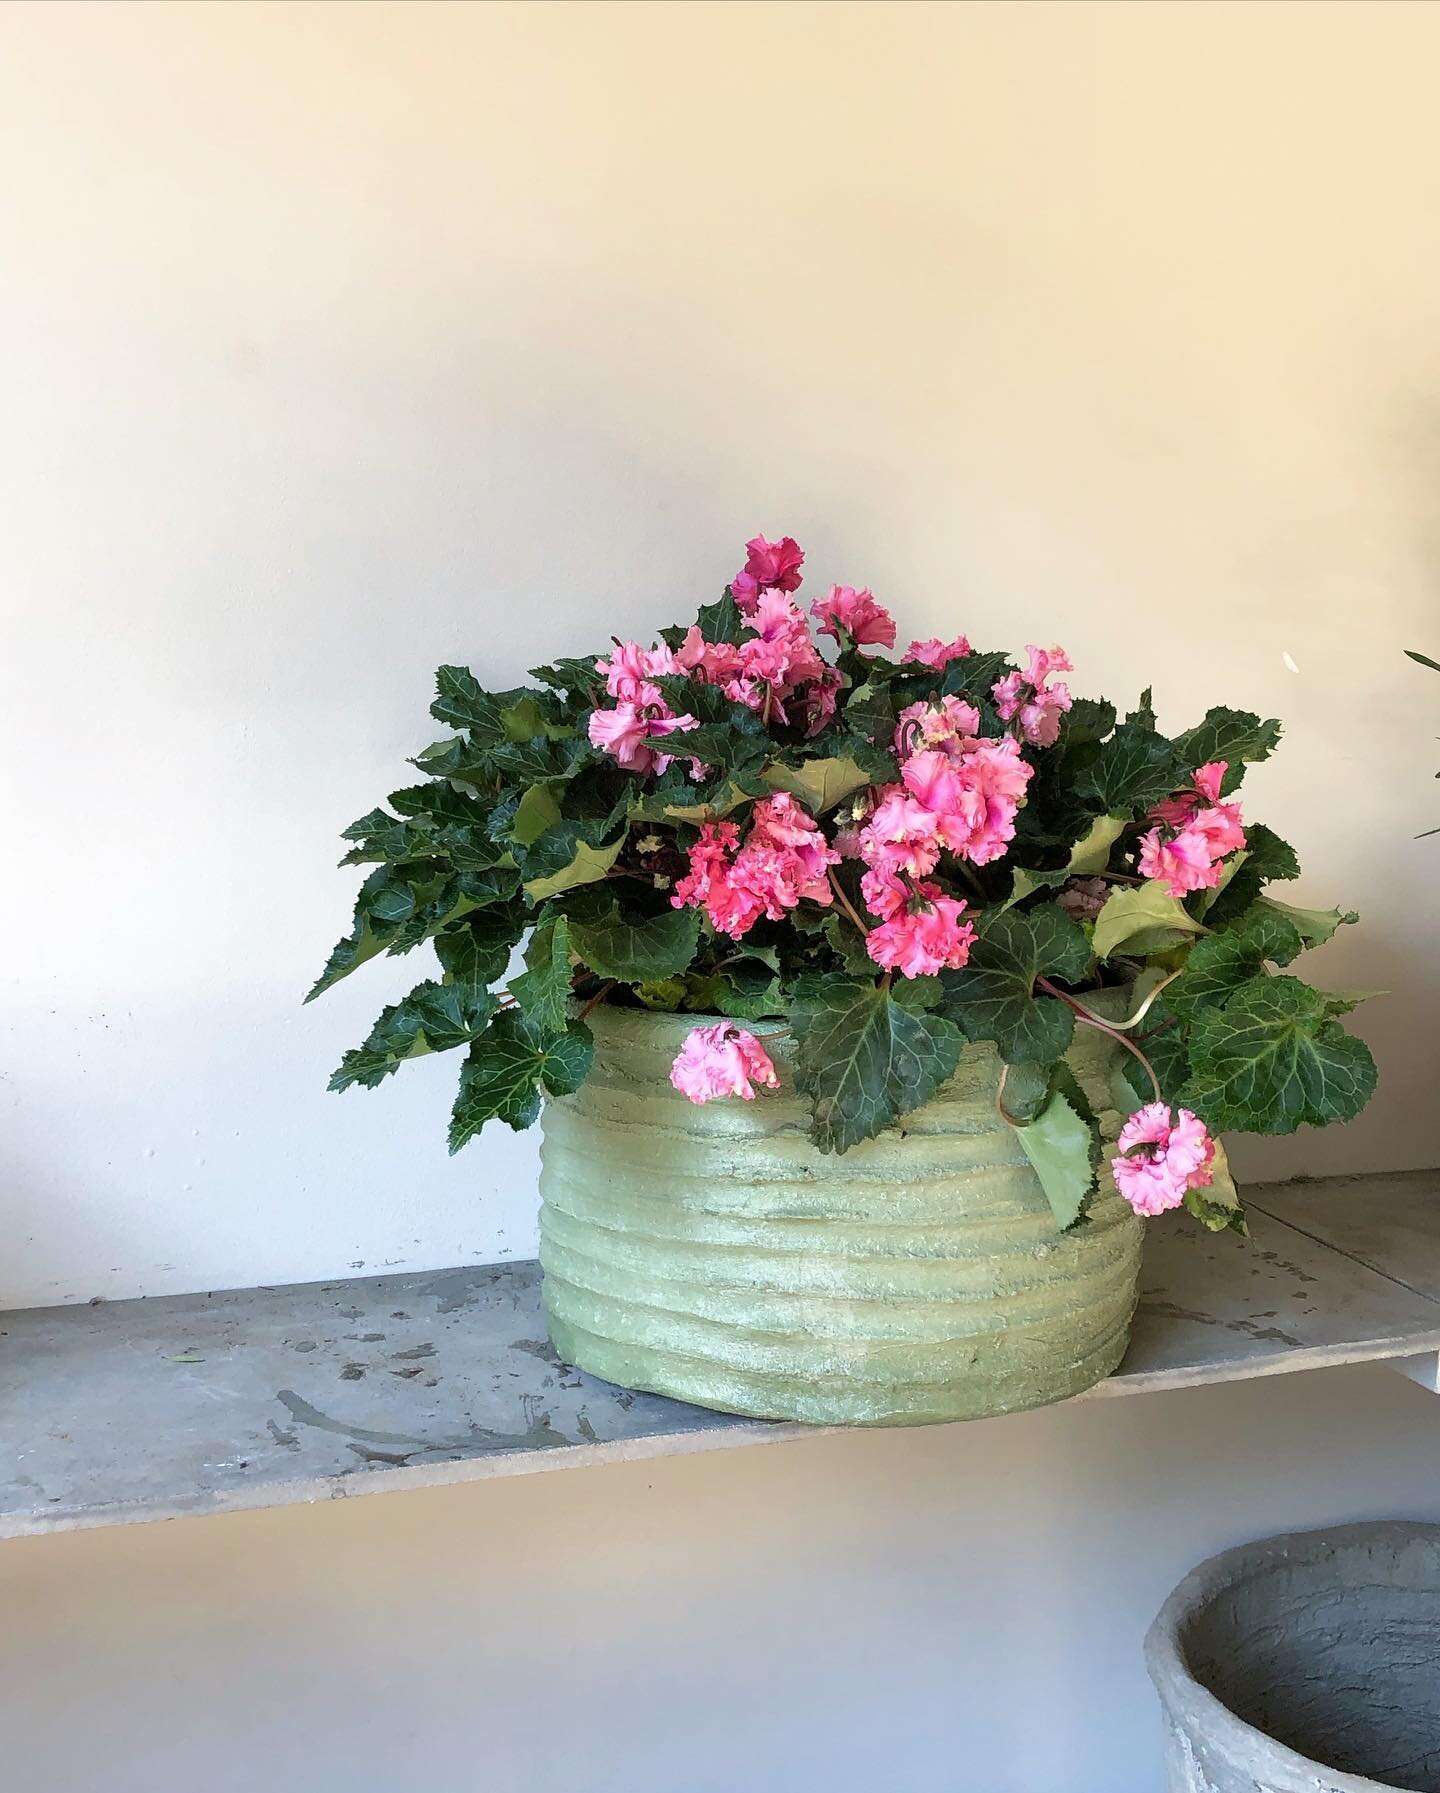 As per the annual springtime ritual, it&rsquo;s time to bring some flowering plants home 🌺🏡

Customize your planter by choosing from 8 colors and 3 texture options to seamlessly incorporate into your home your favorite few plants 🌺🪴

Get 10% off 